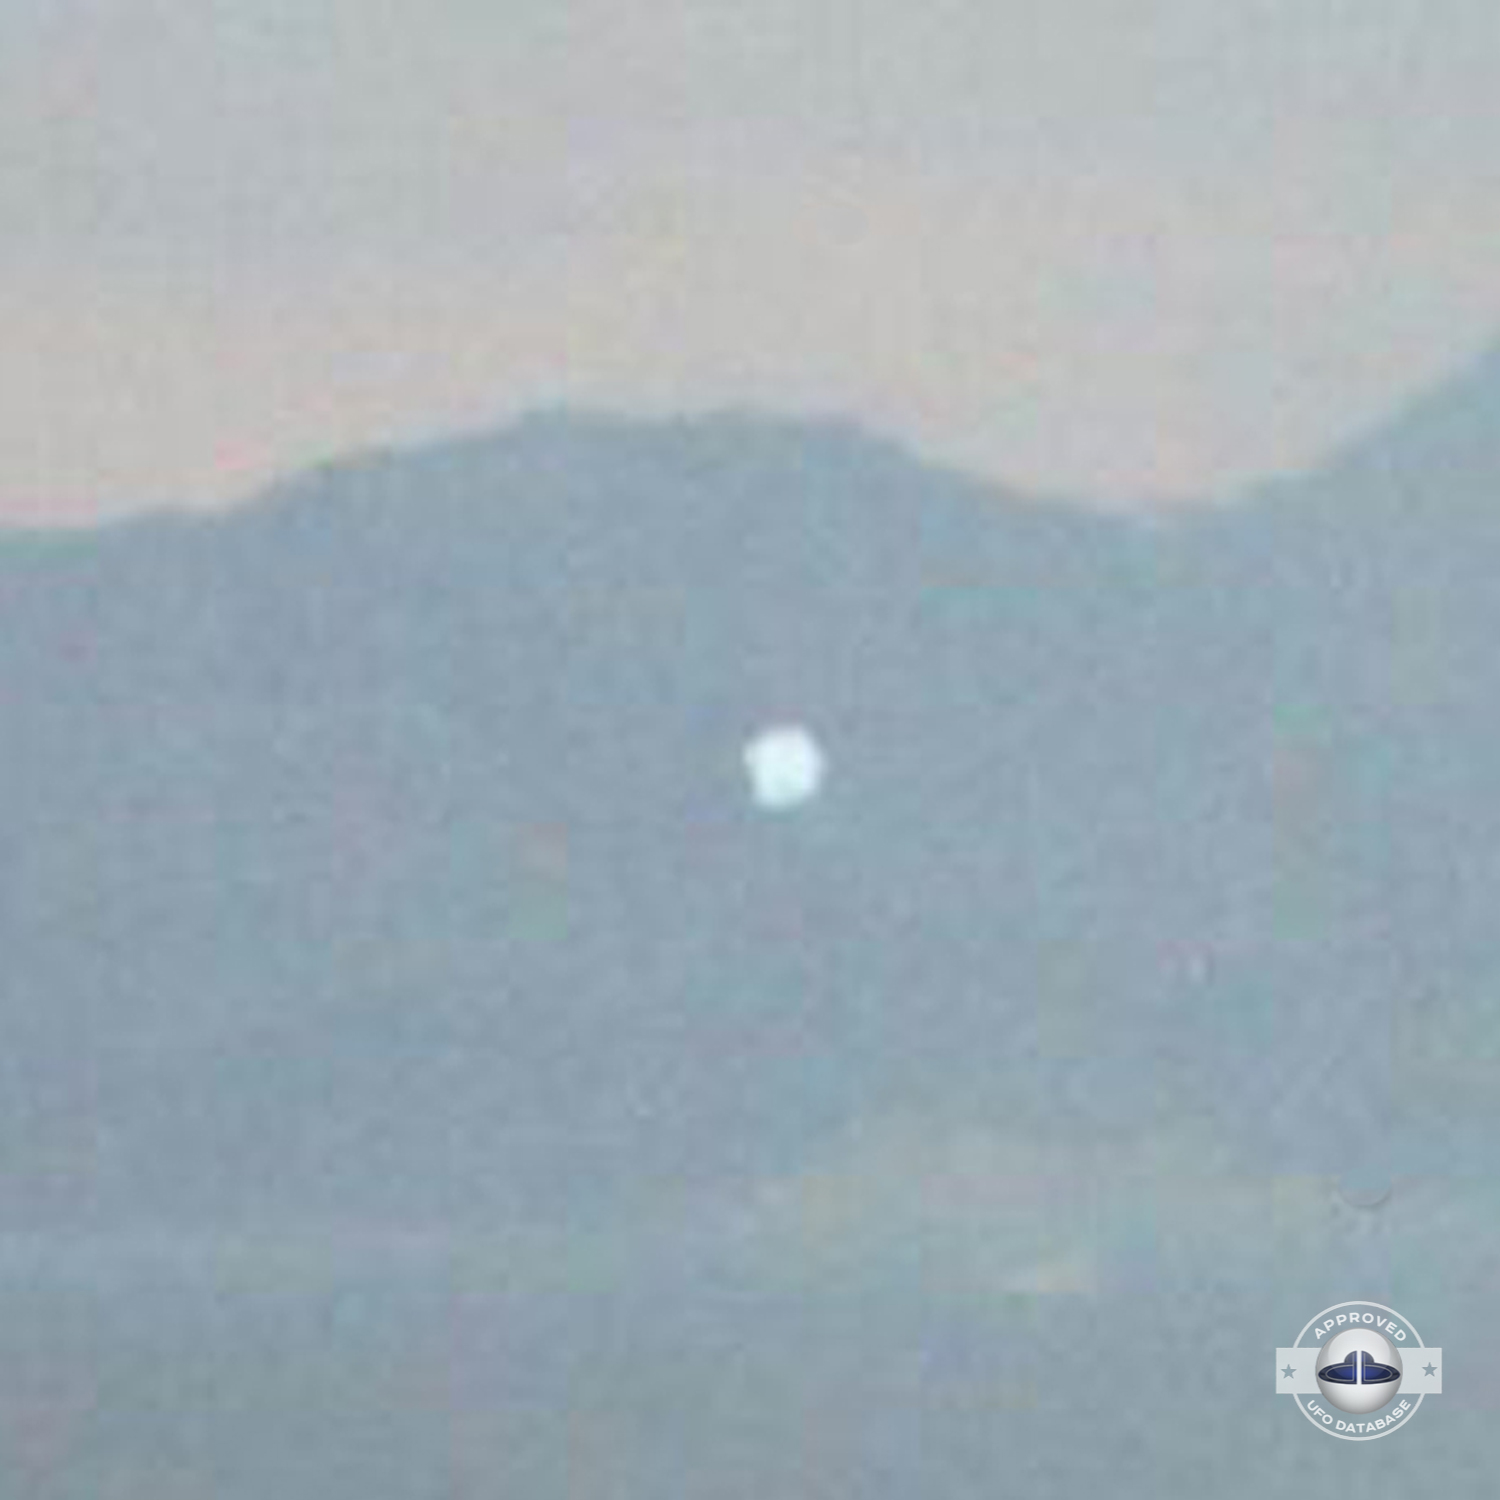 UFO passing over unknown body of water somewhere in Turkey | May 2003 UFO Picture #173-4